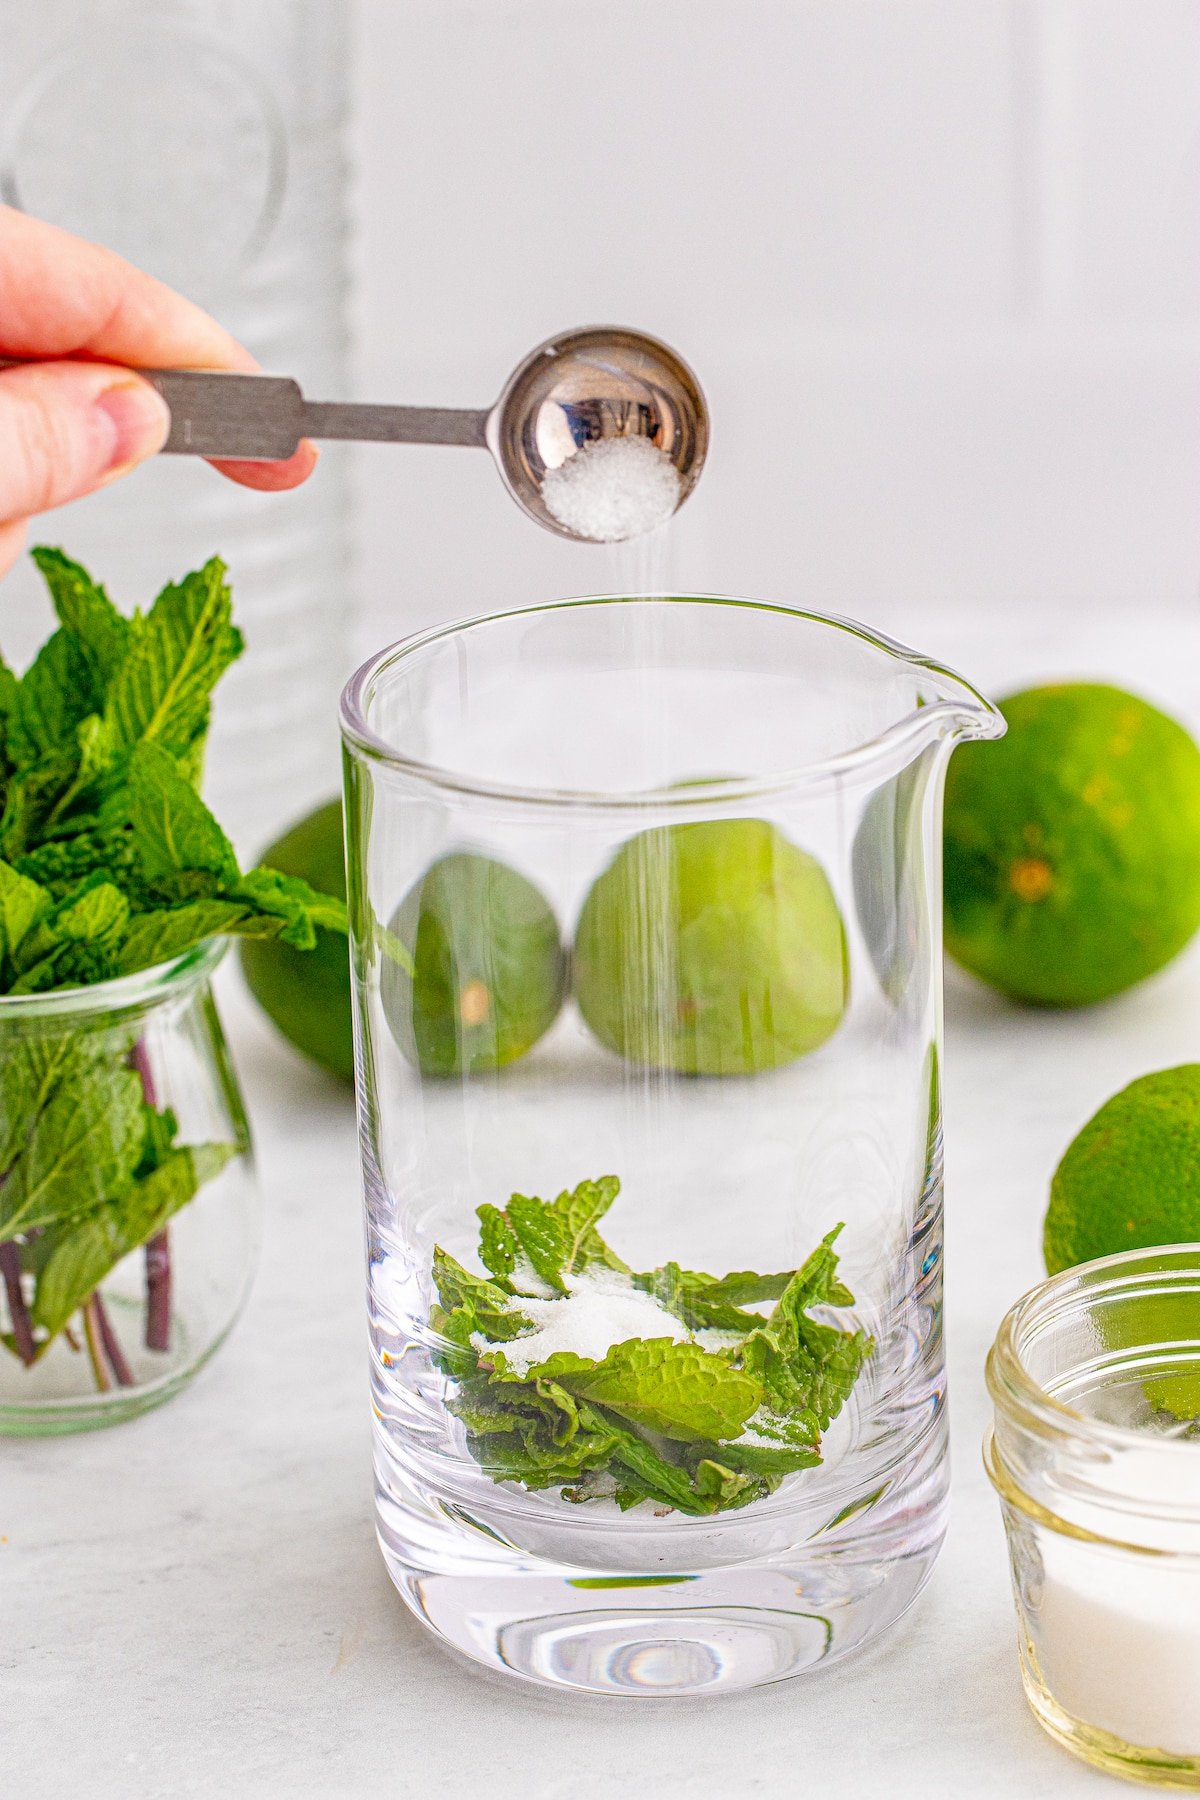 hand adding sugar to a glass with mint